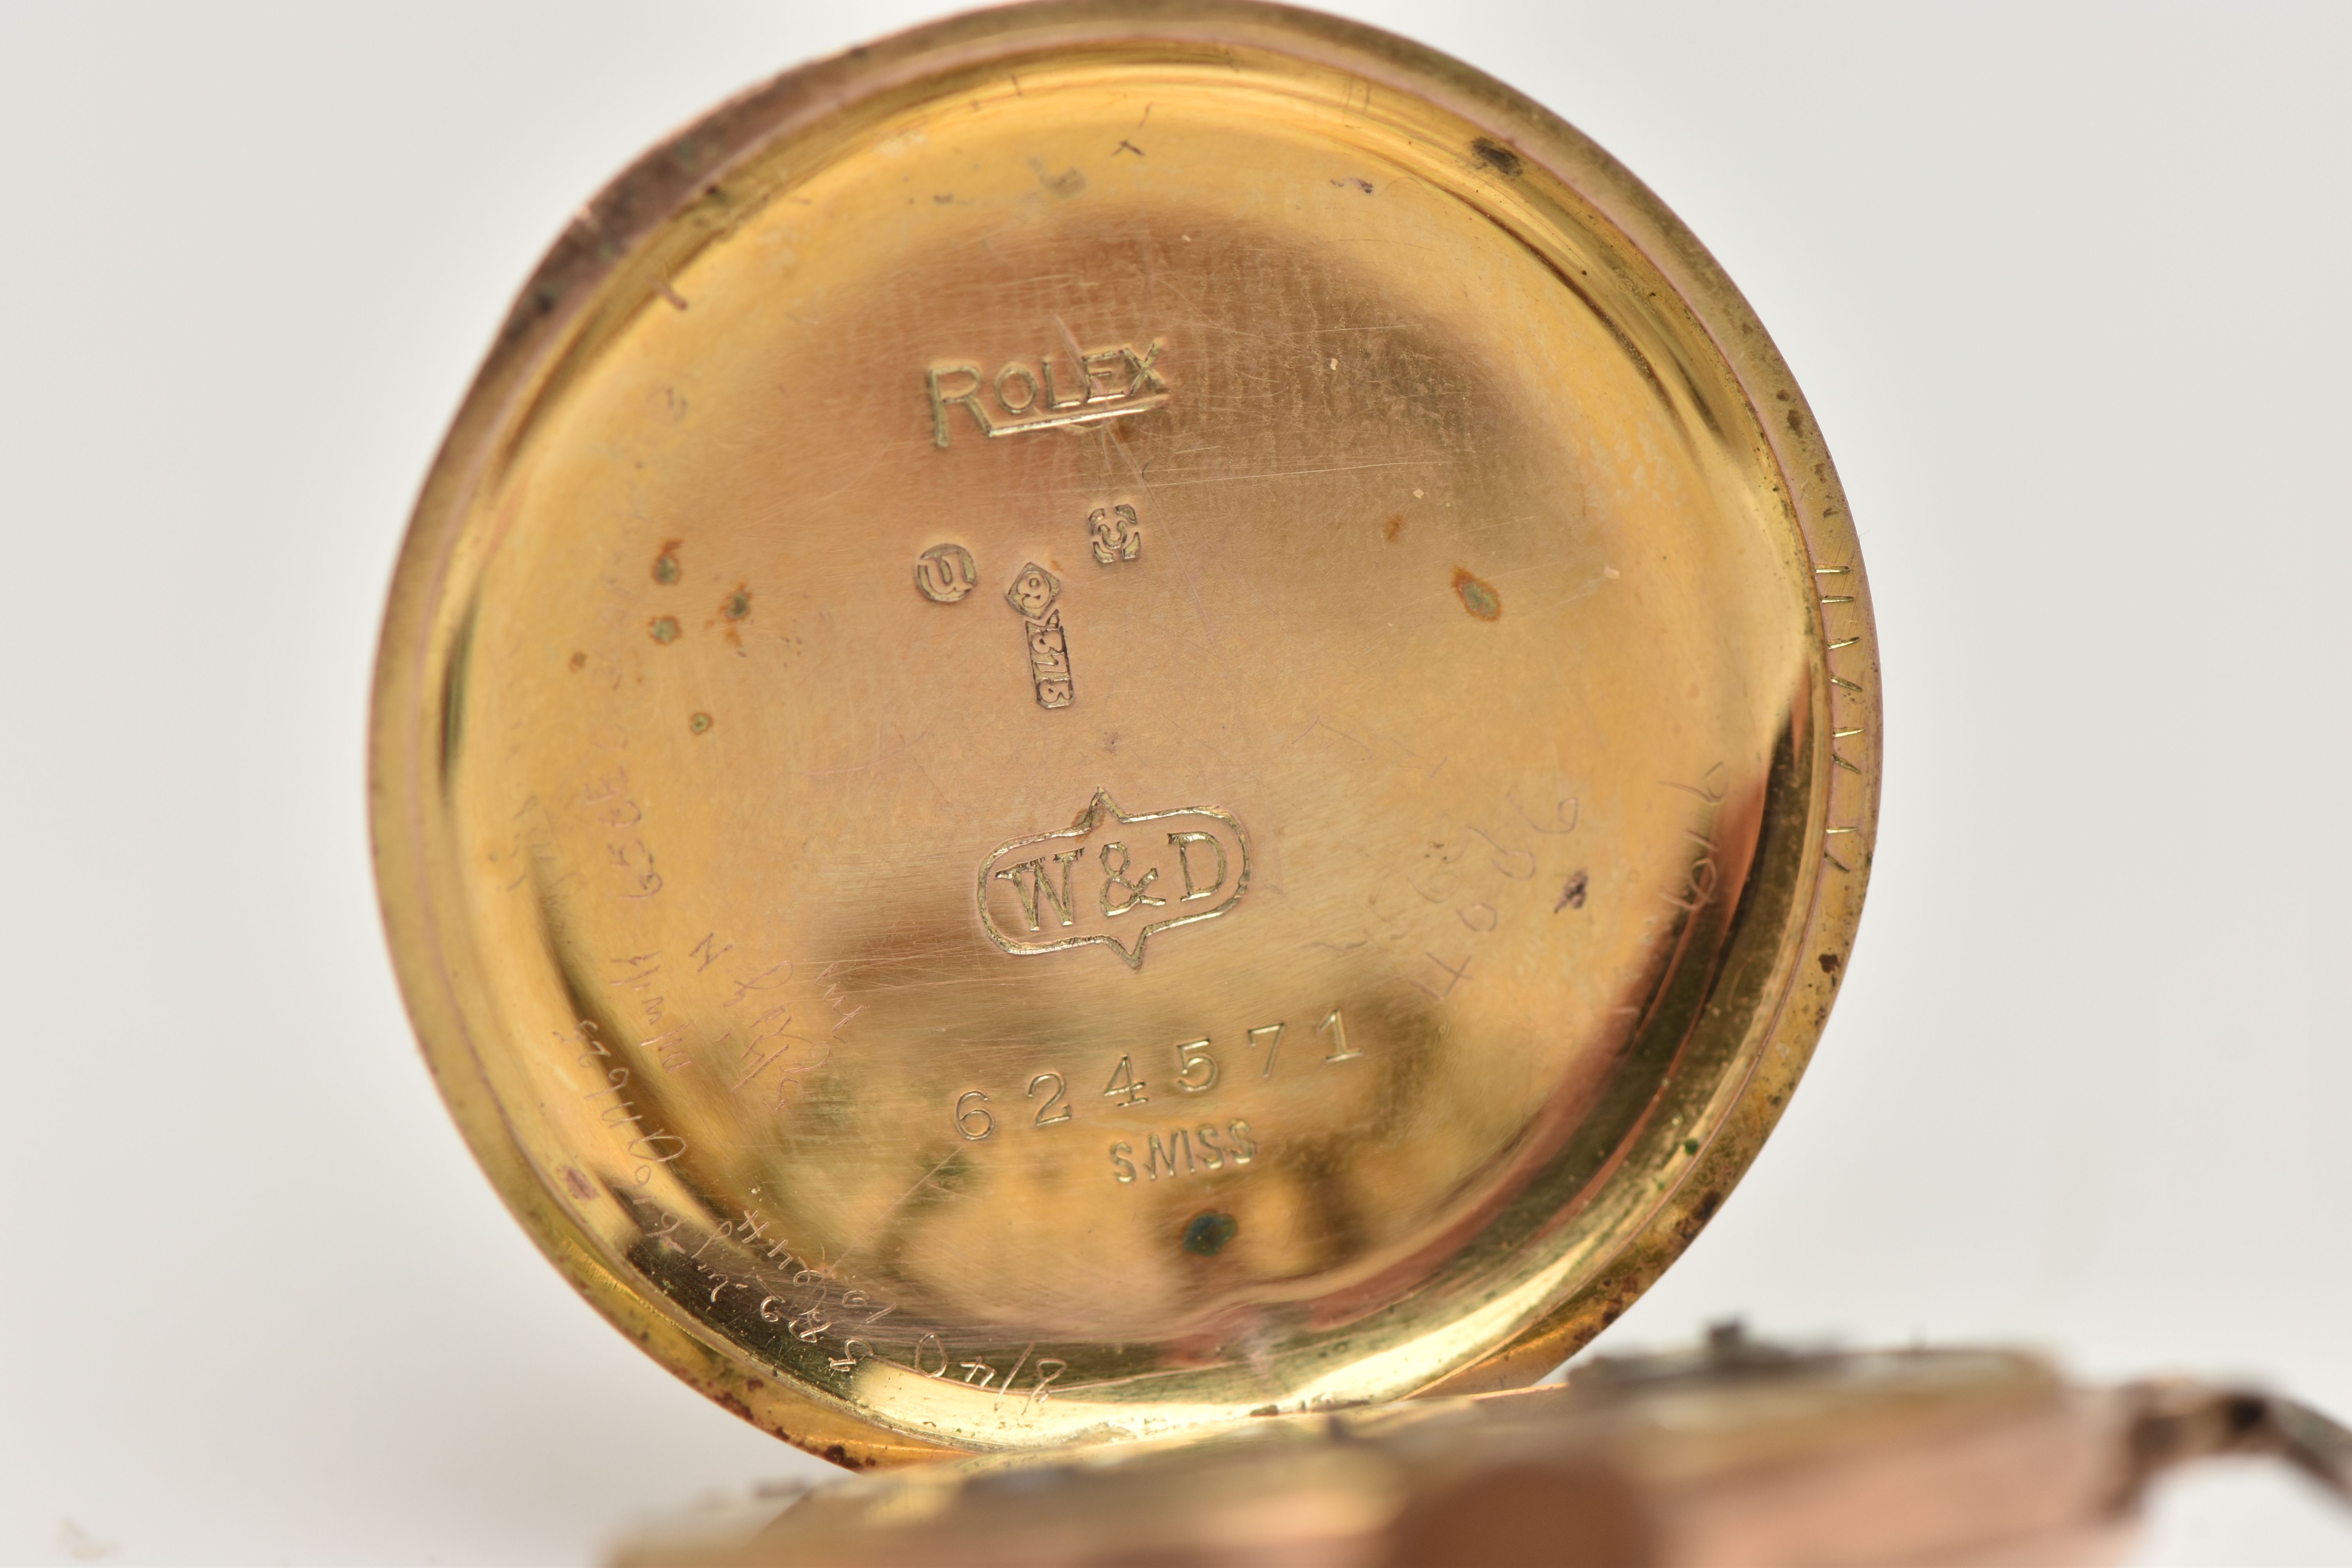 A 9CT GOLD 'ROLEX' WATCH HEAD, an early 20th century, manual wind watch head, round white dial, - Image 6 of 6